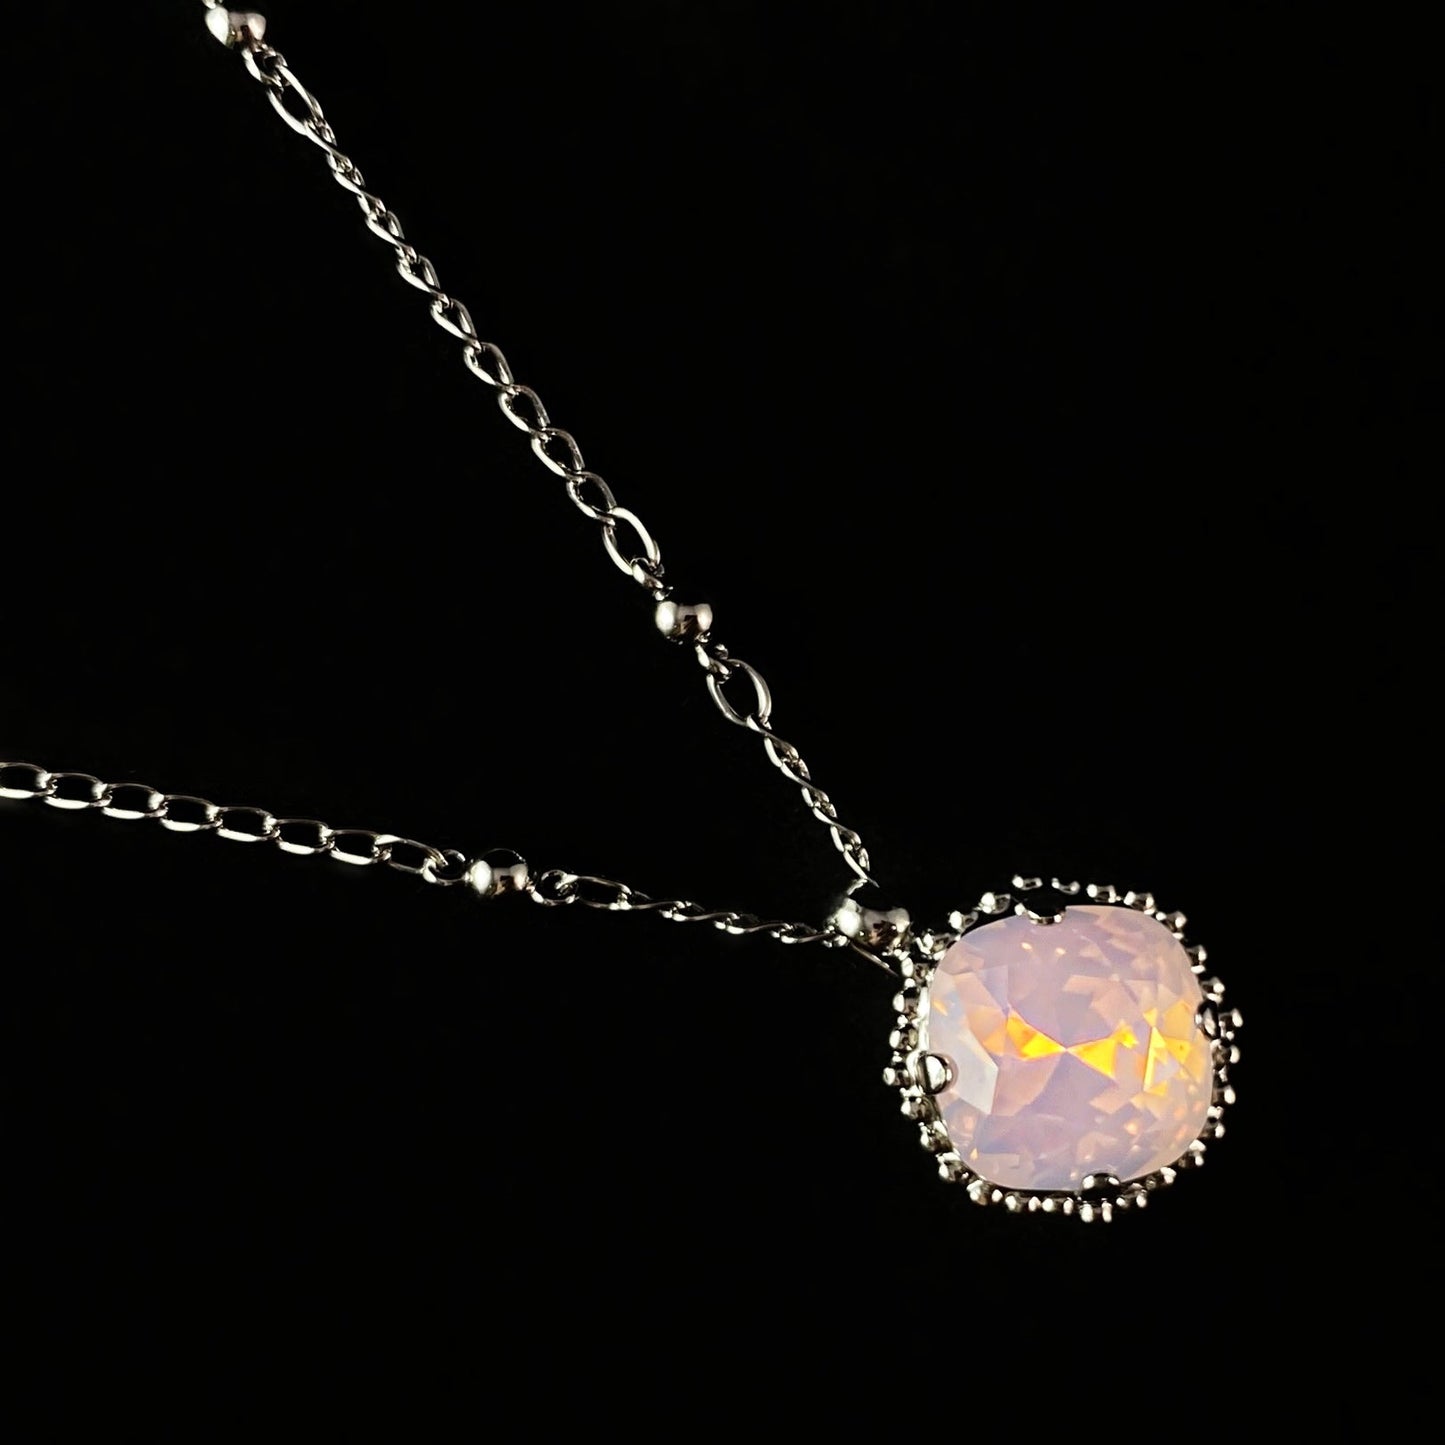 Cushion Cut Crystal Pendant Necklace with Decorative Border